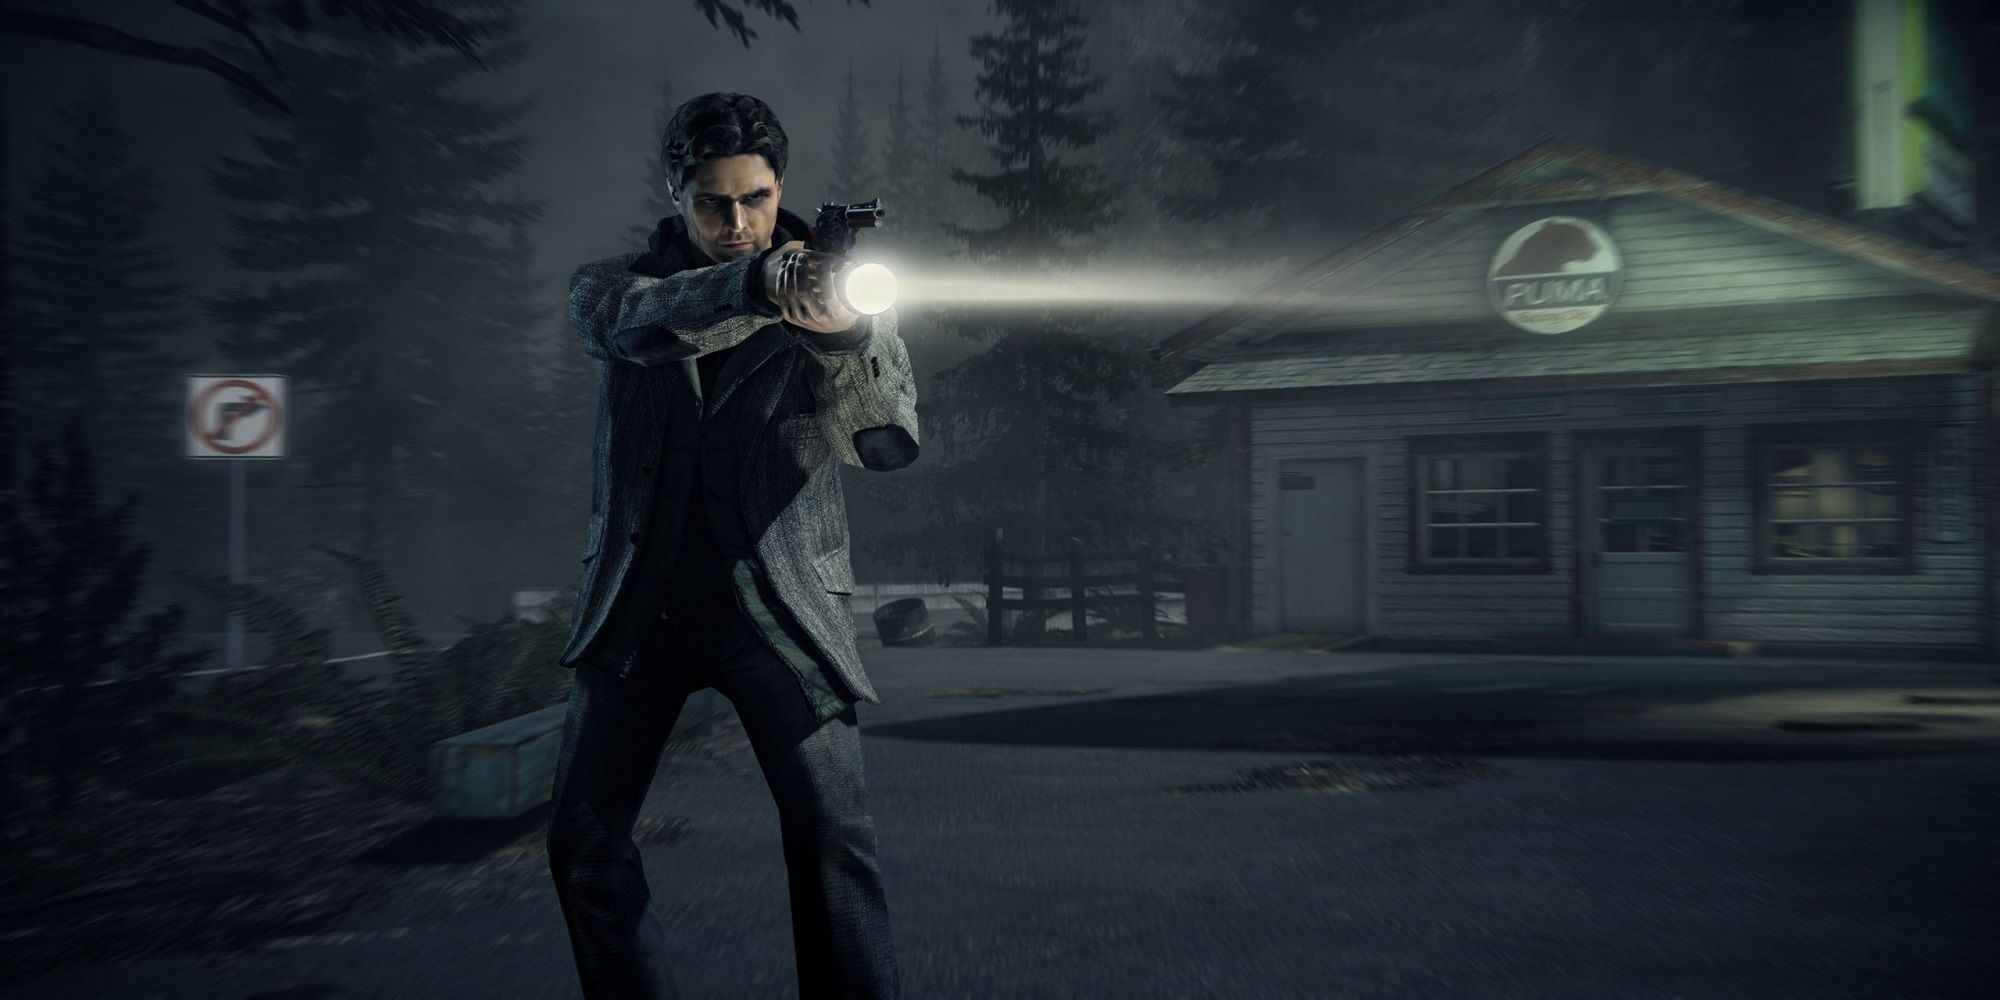 Alan wake stands outside a store in a dark forest holding a flashlight and gun